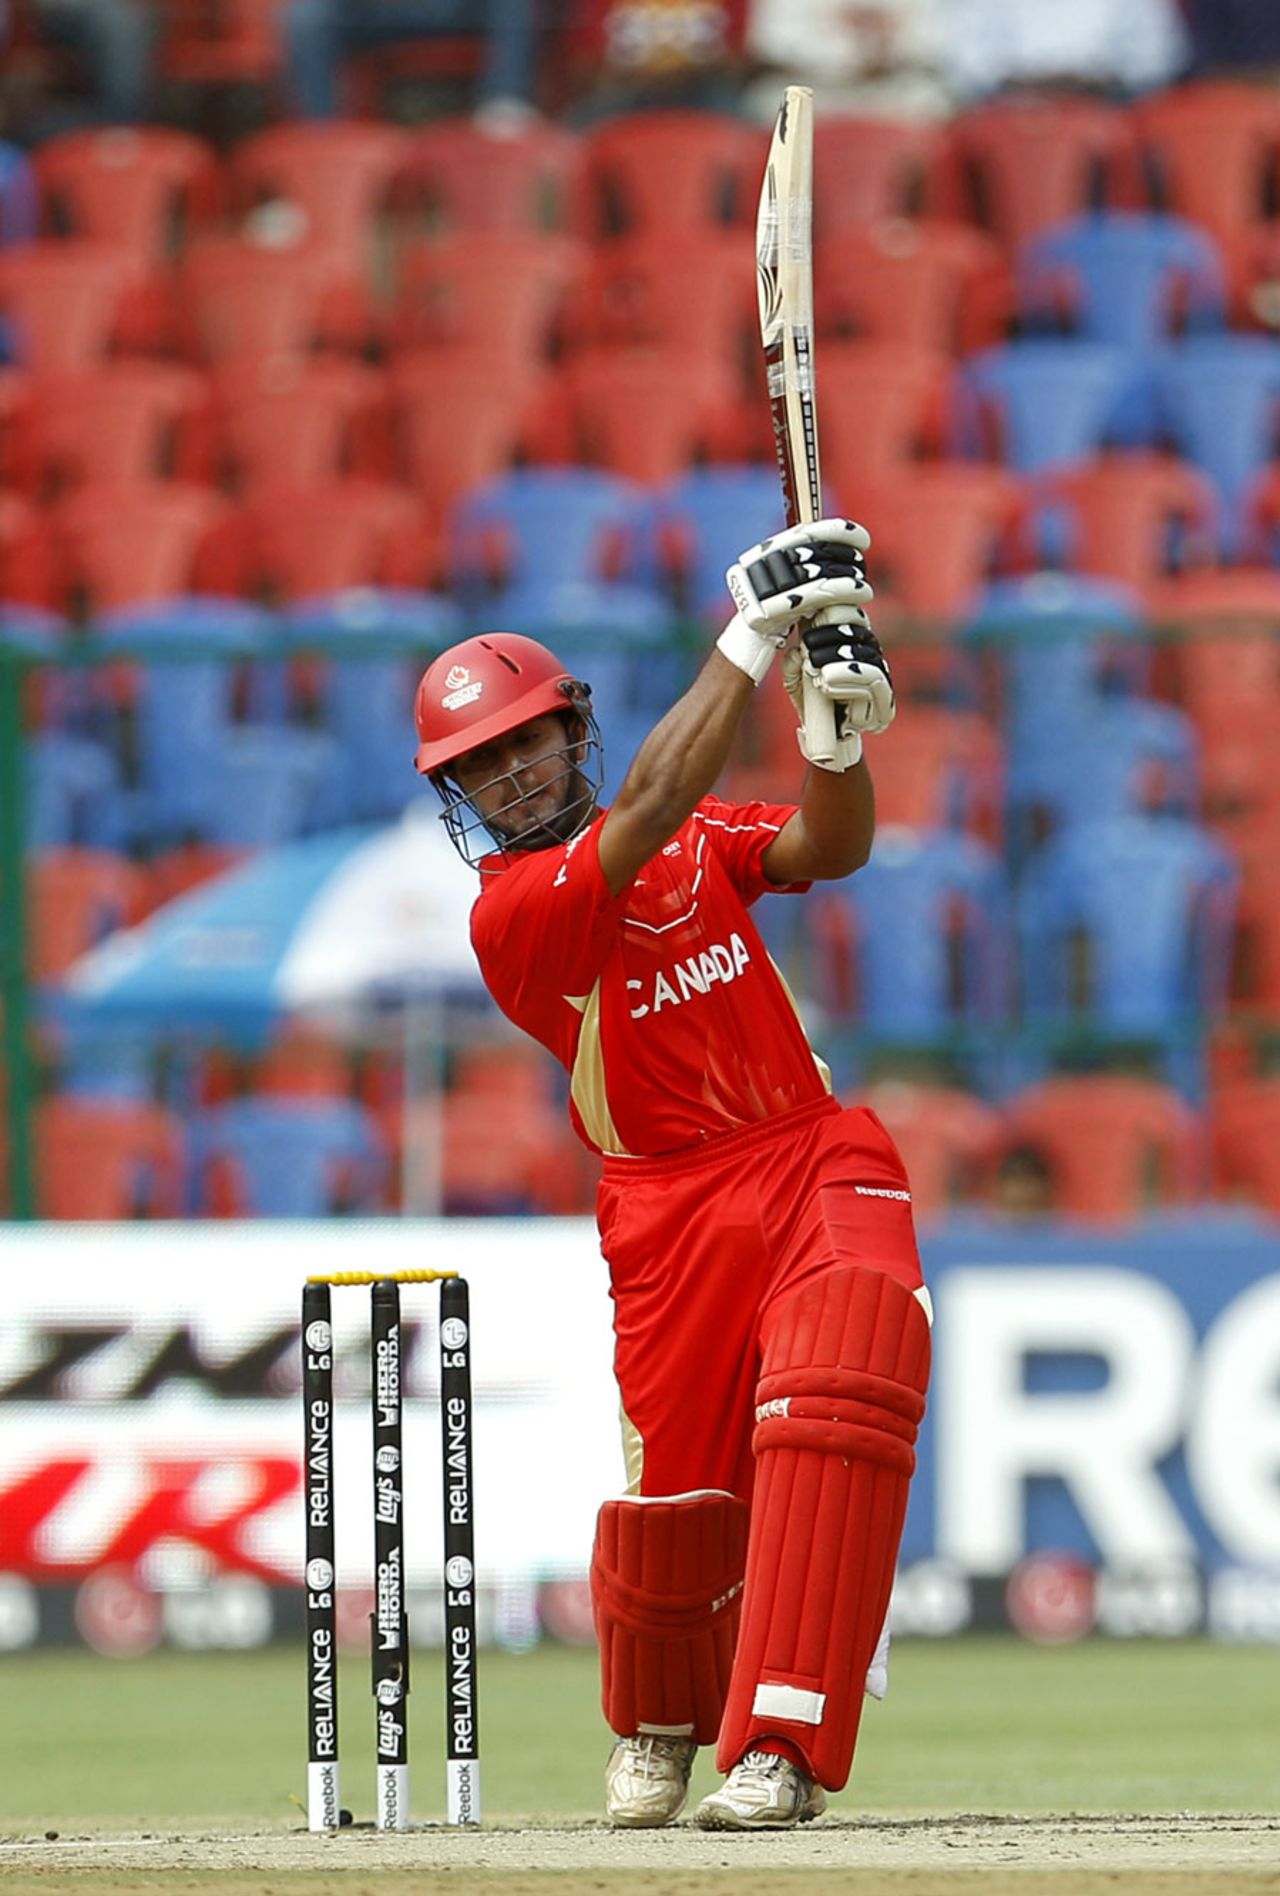 Hiral Patel struck three sixes on his way to a 37-ball fifty, Australia v Canada, Group A, World Cup, Bangalore, March 16, 2011